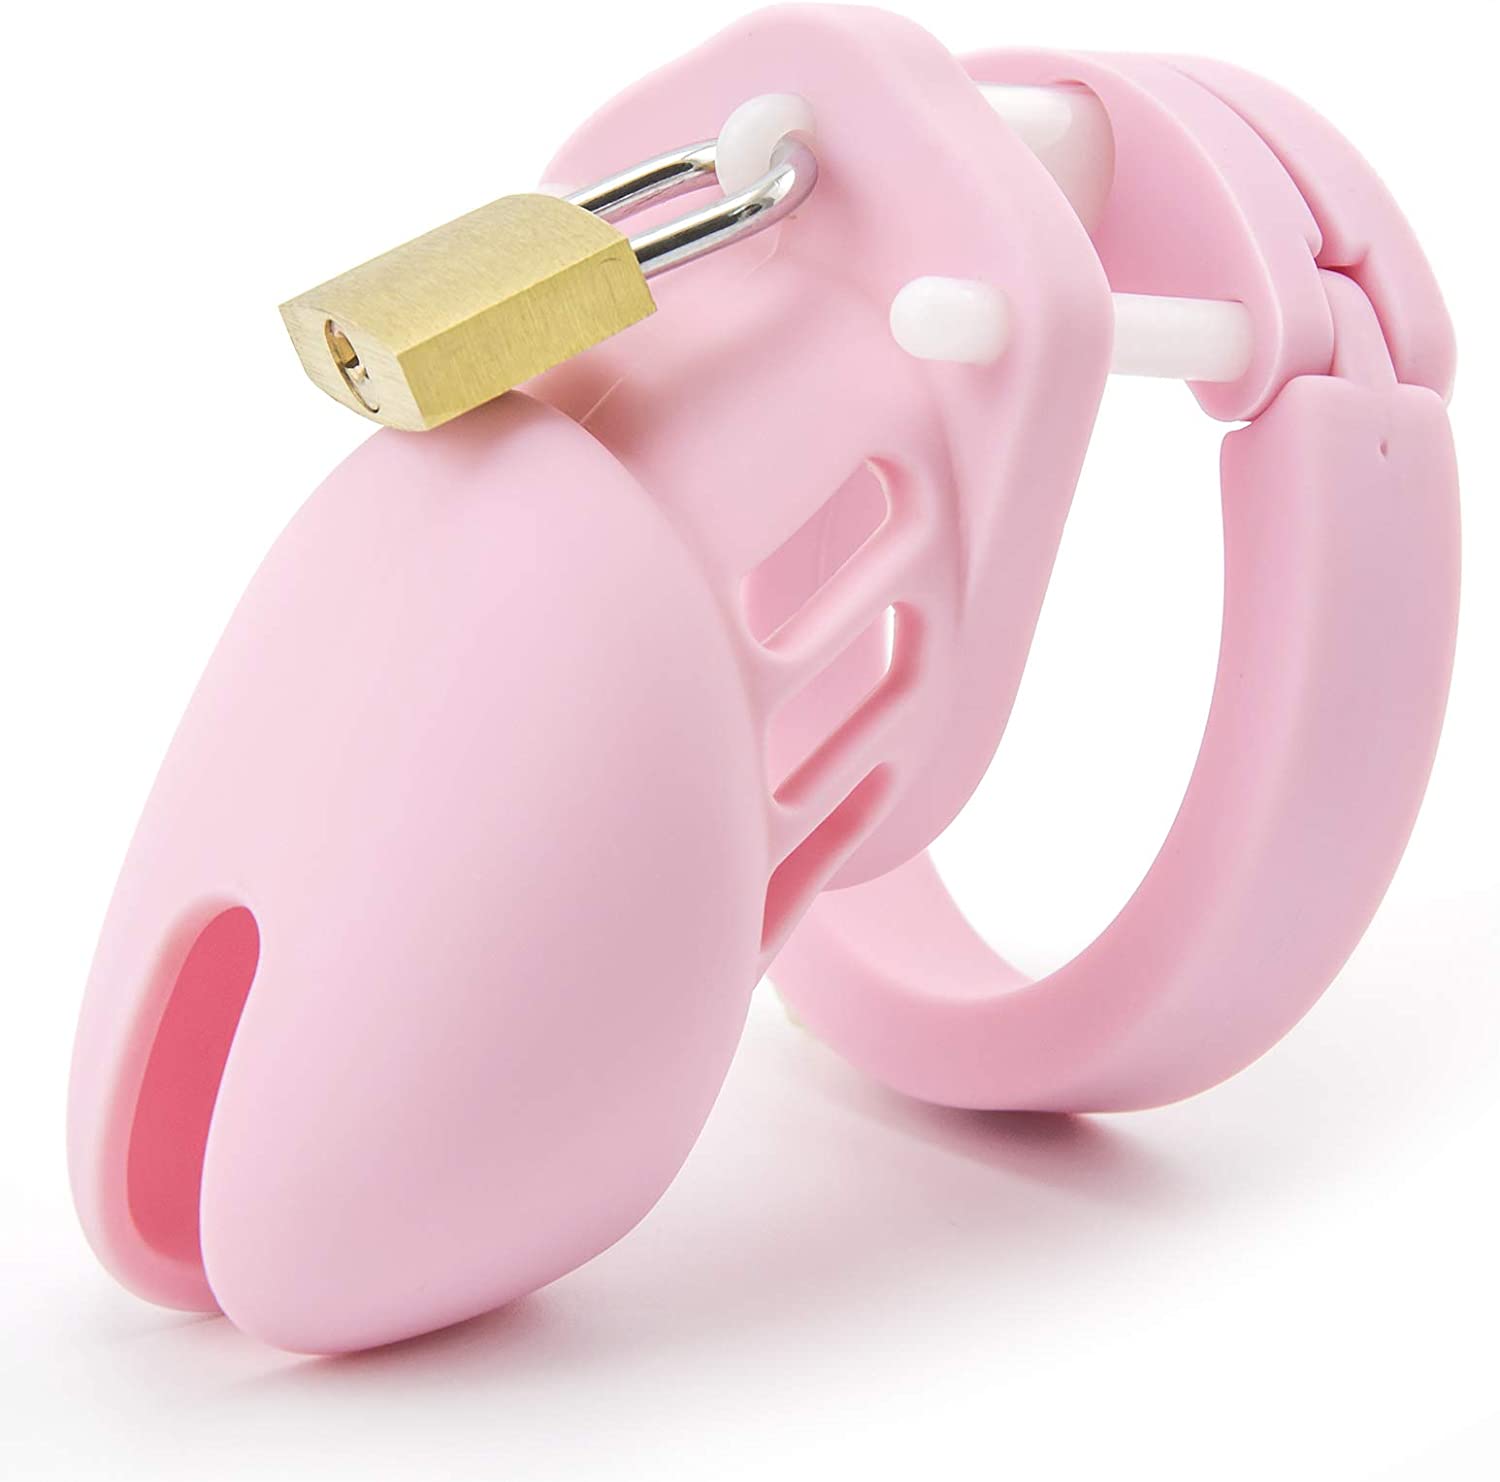  Clip 2 Pcs Chastity Devices Male Penis Ring Device